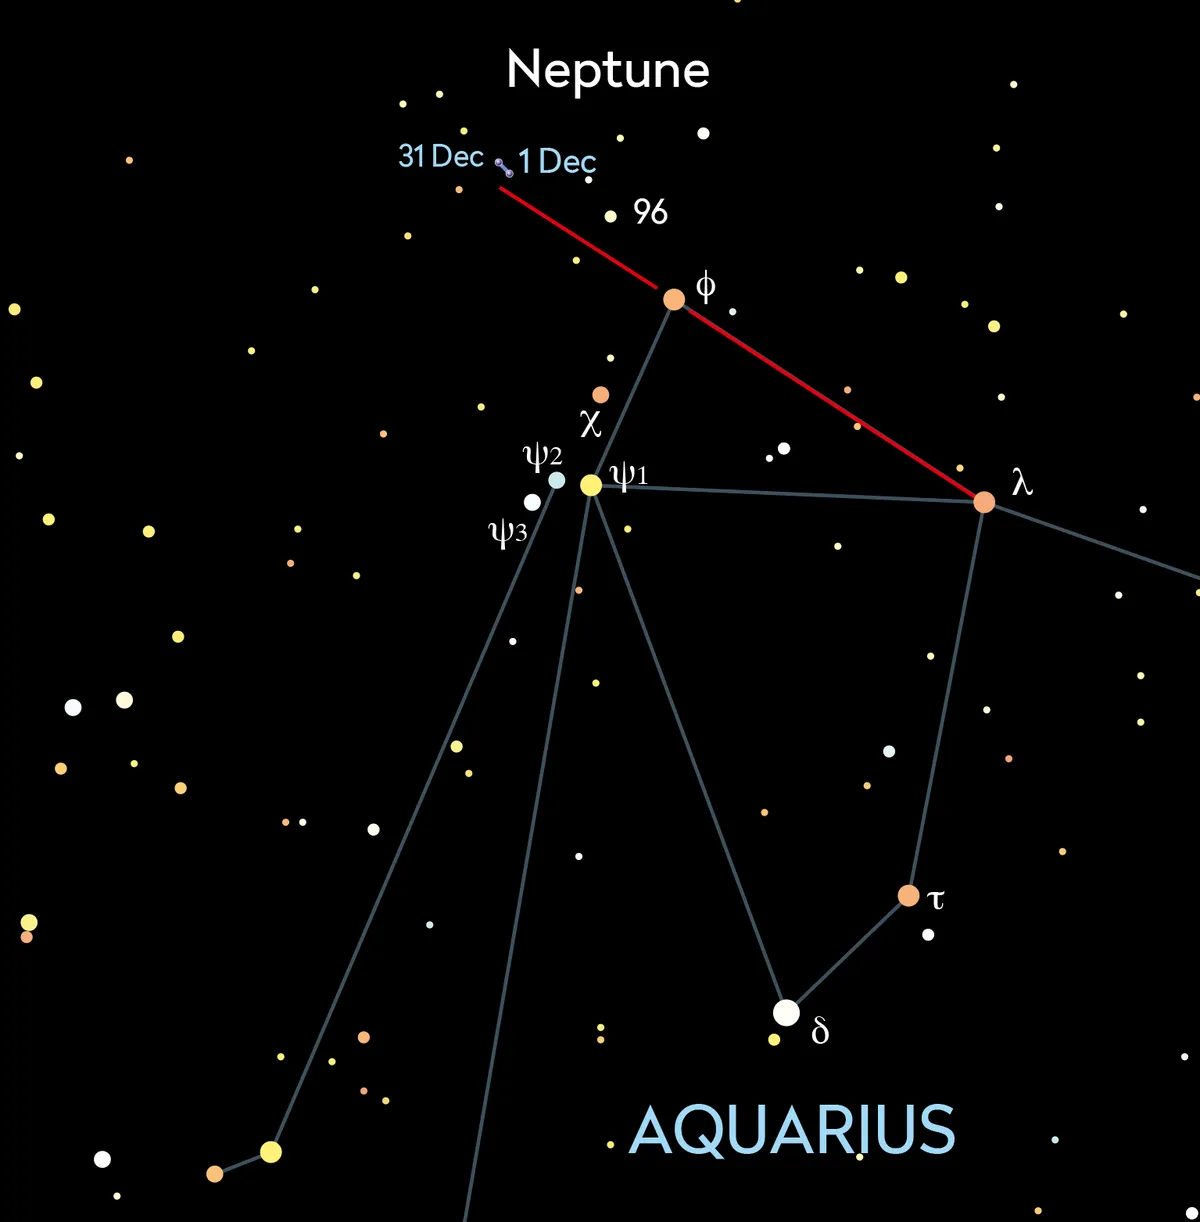 A star chart showing the position of Neptune in the night sky throughout December 2021.